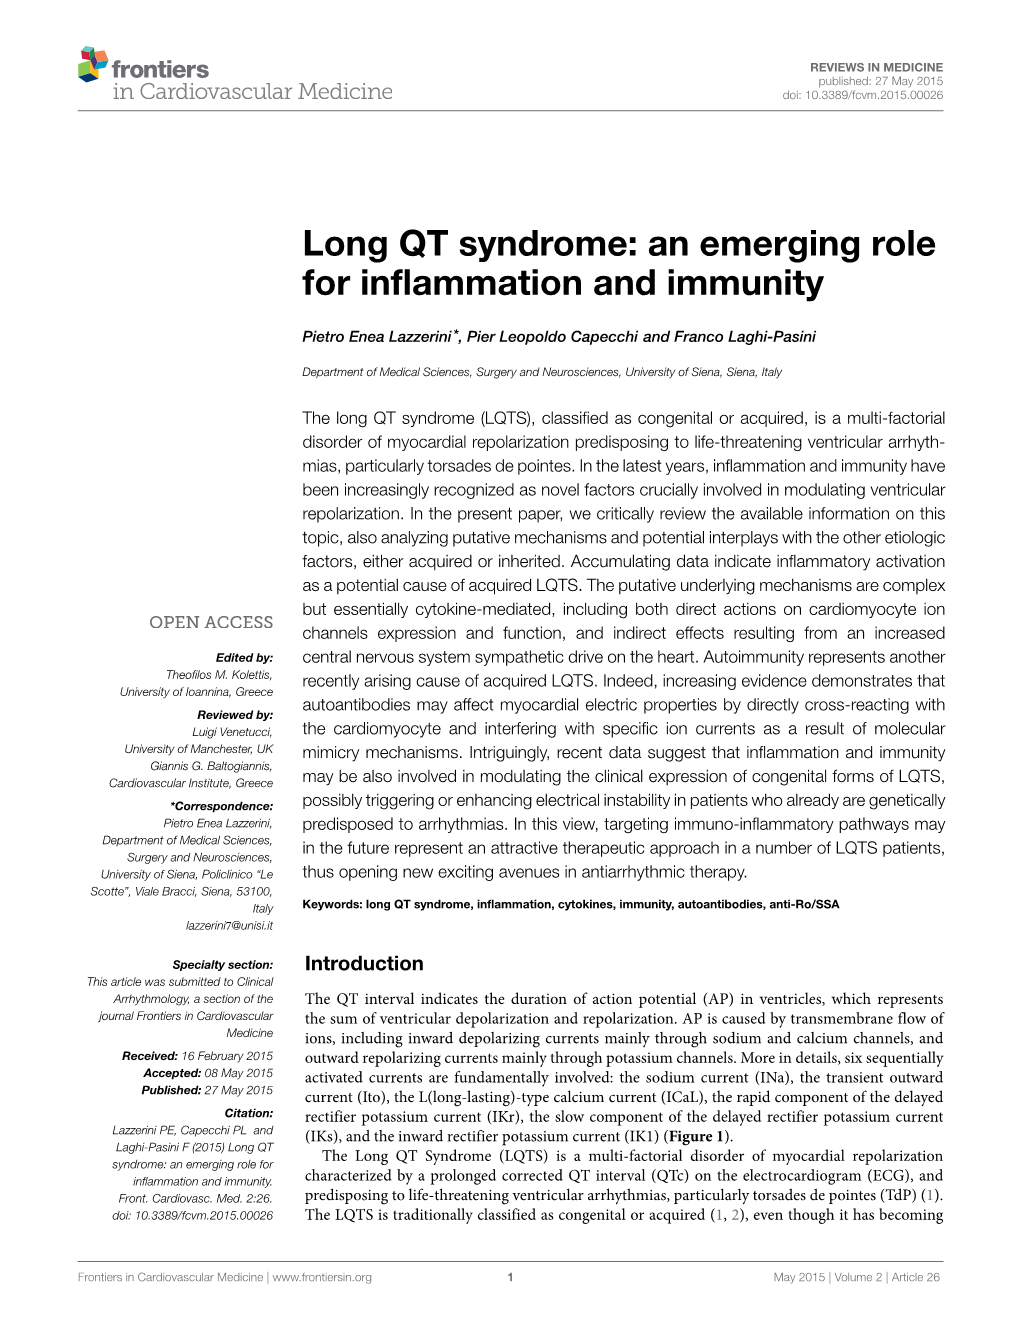 Long QT Syndrome: an Emerging Role for Inflammation and Immunity